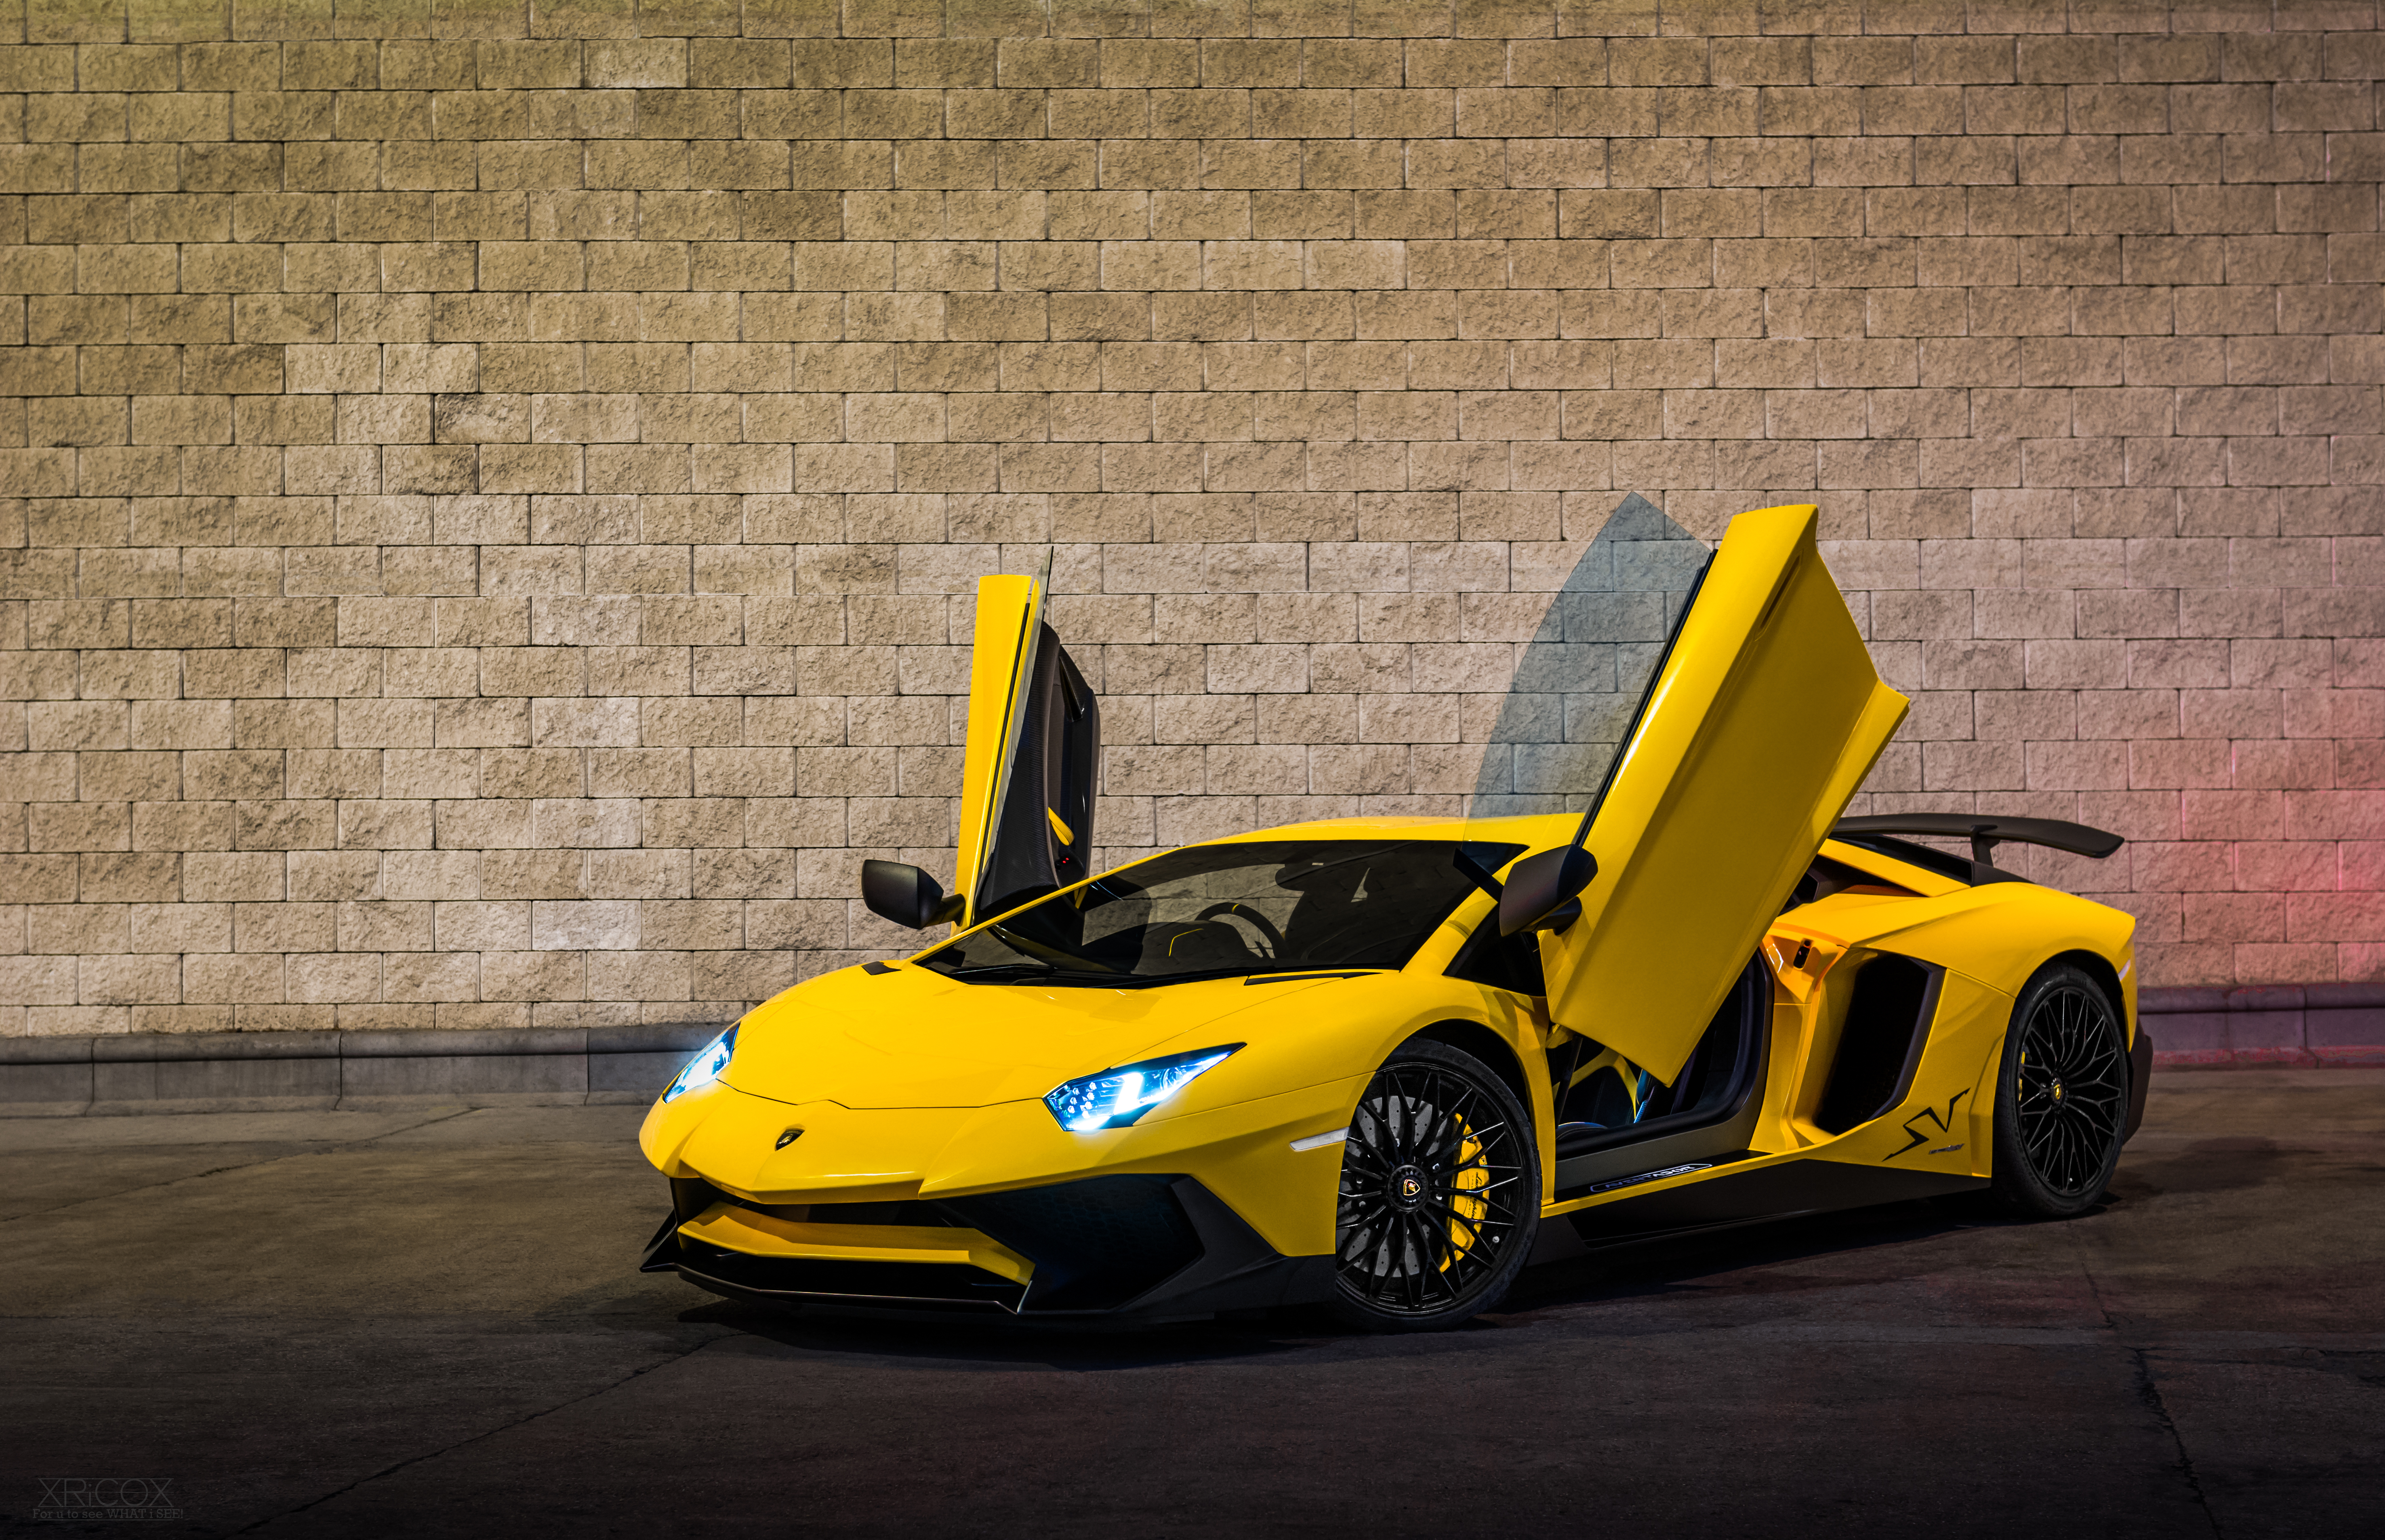 A picture of a yellow Lamborghini Aventador with the doors open.